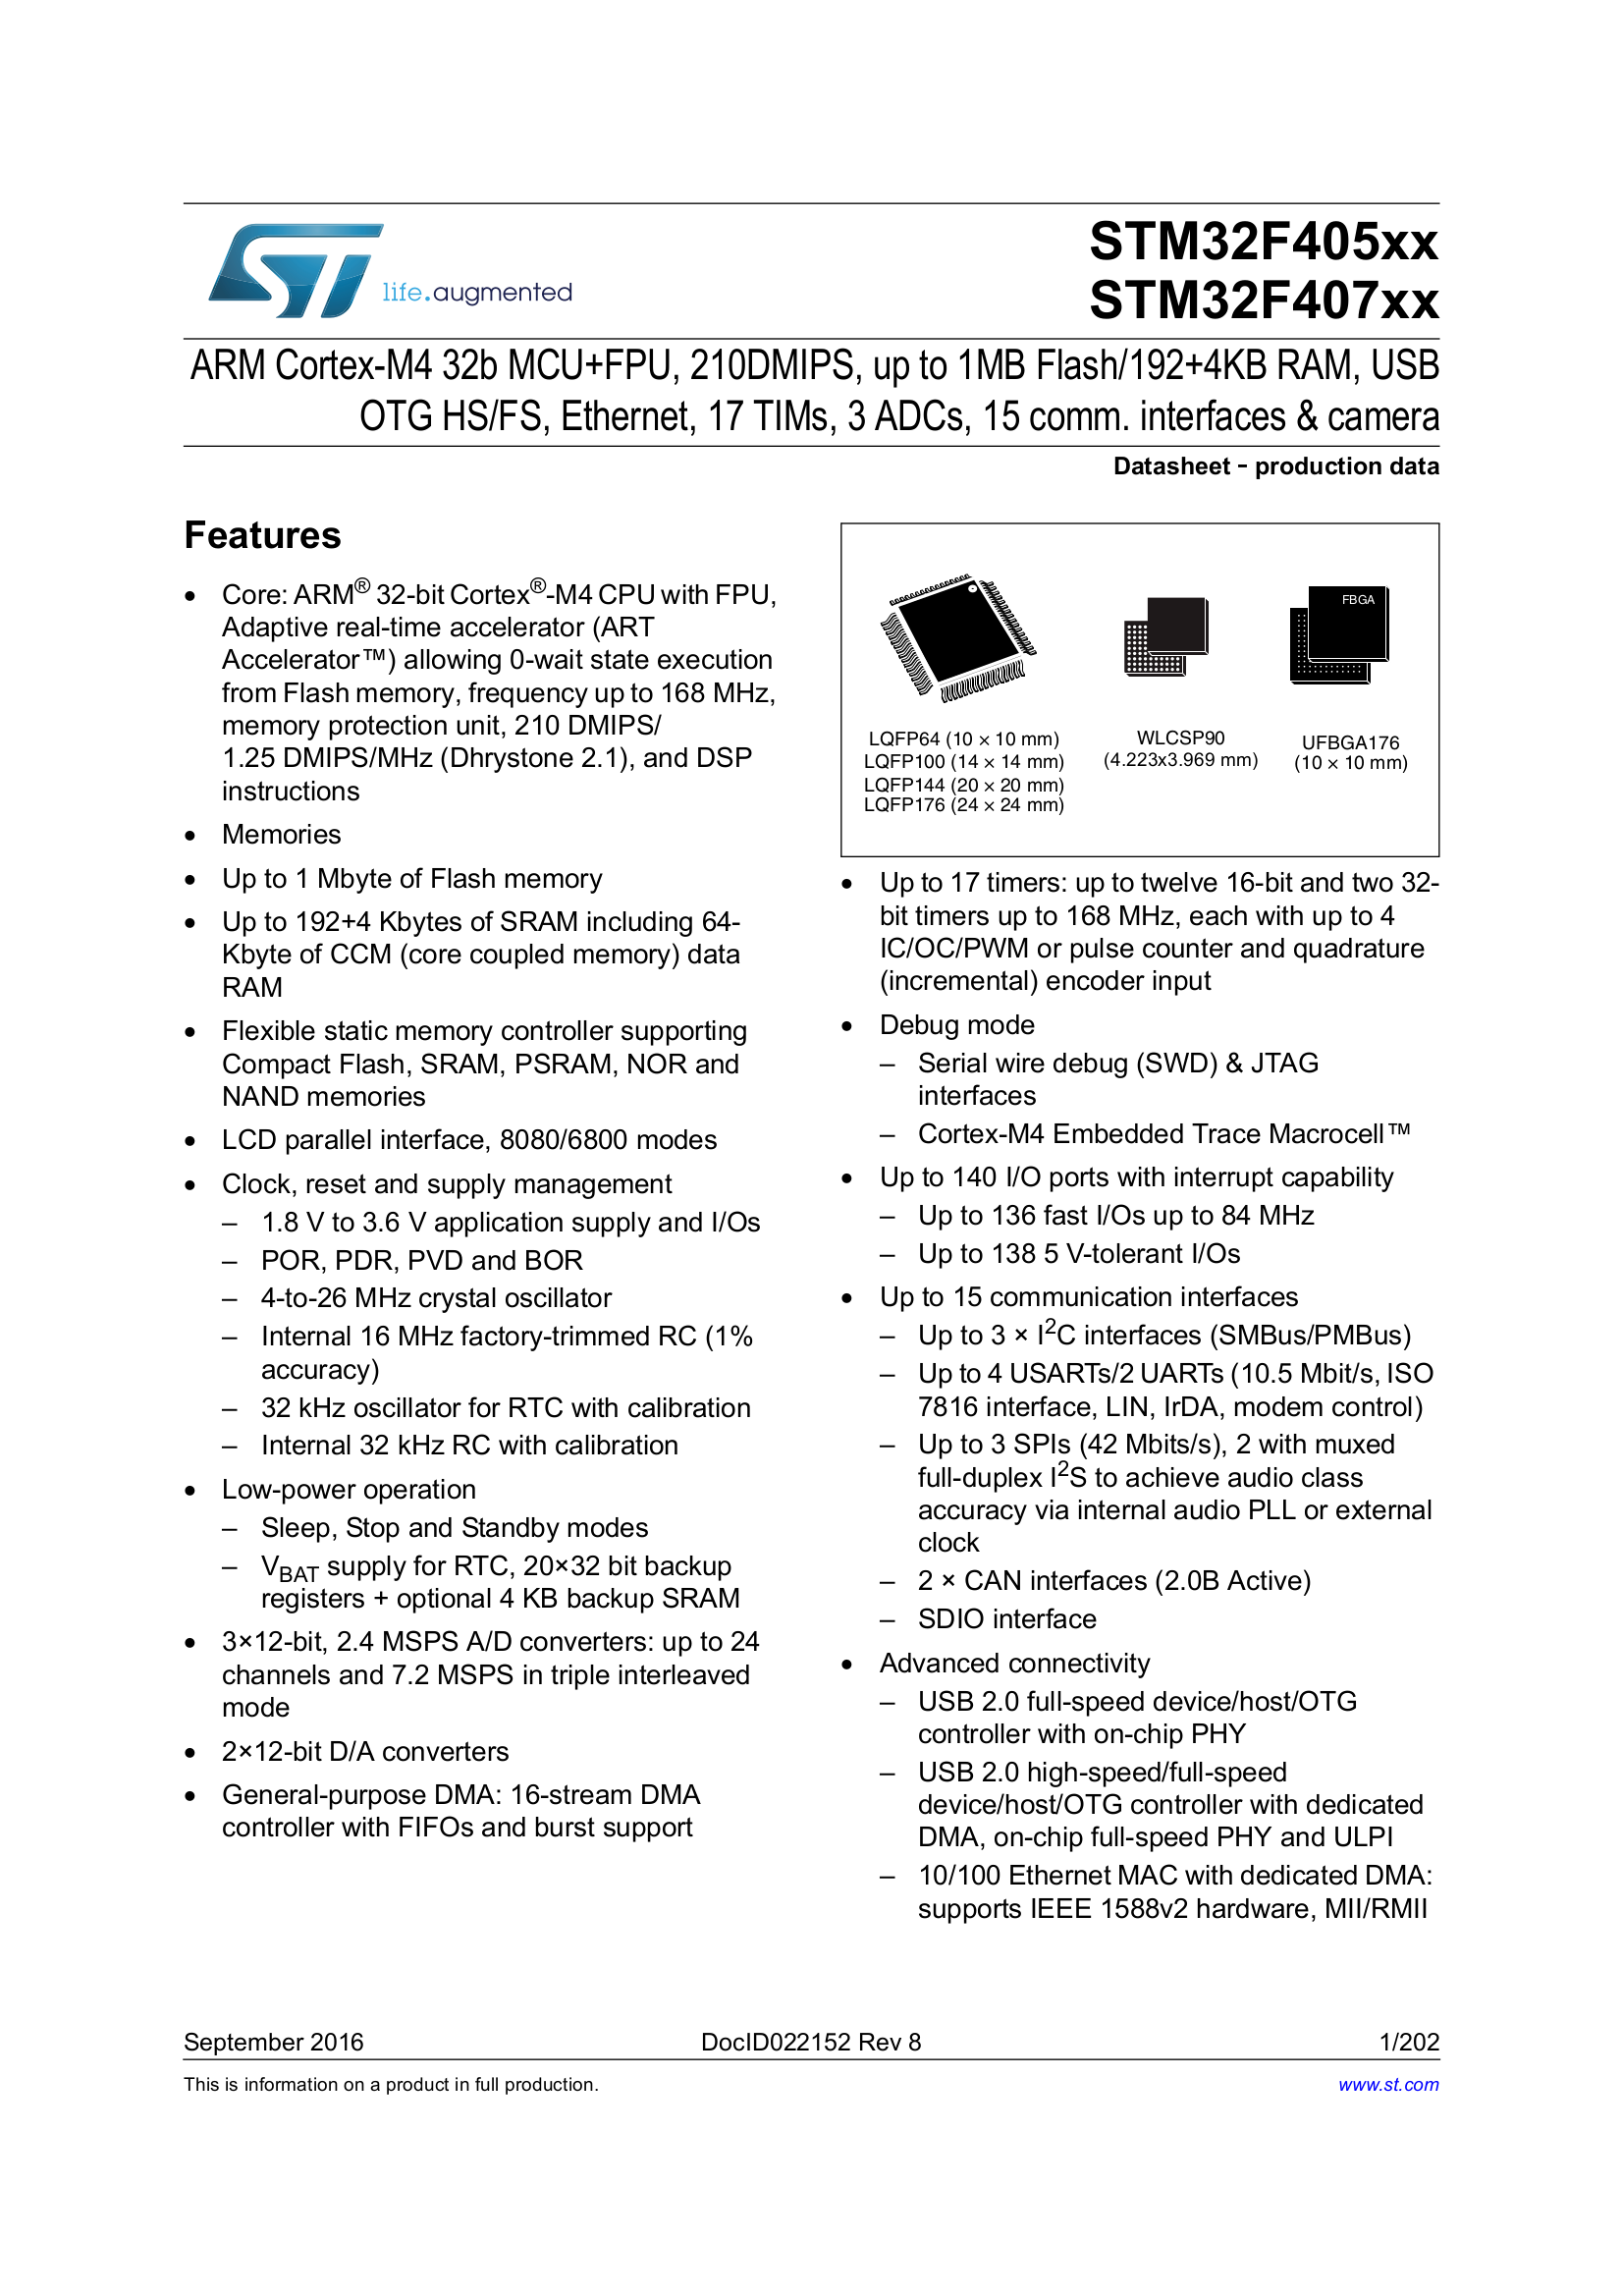 Example product brief (STM32F407)